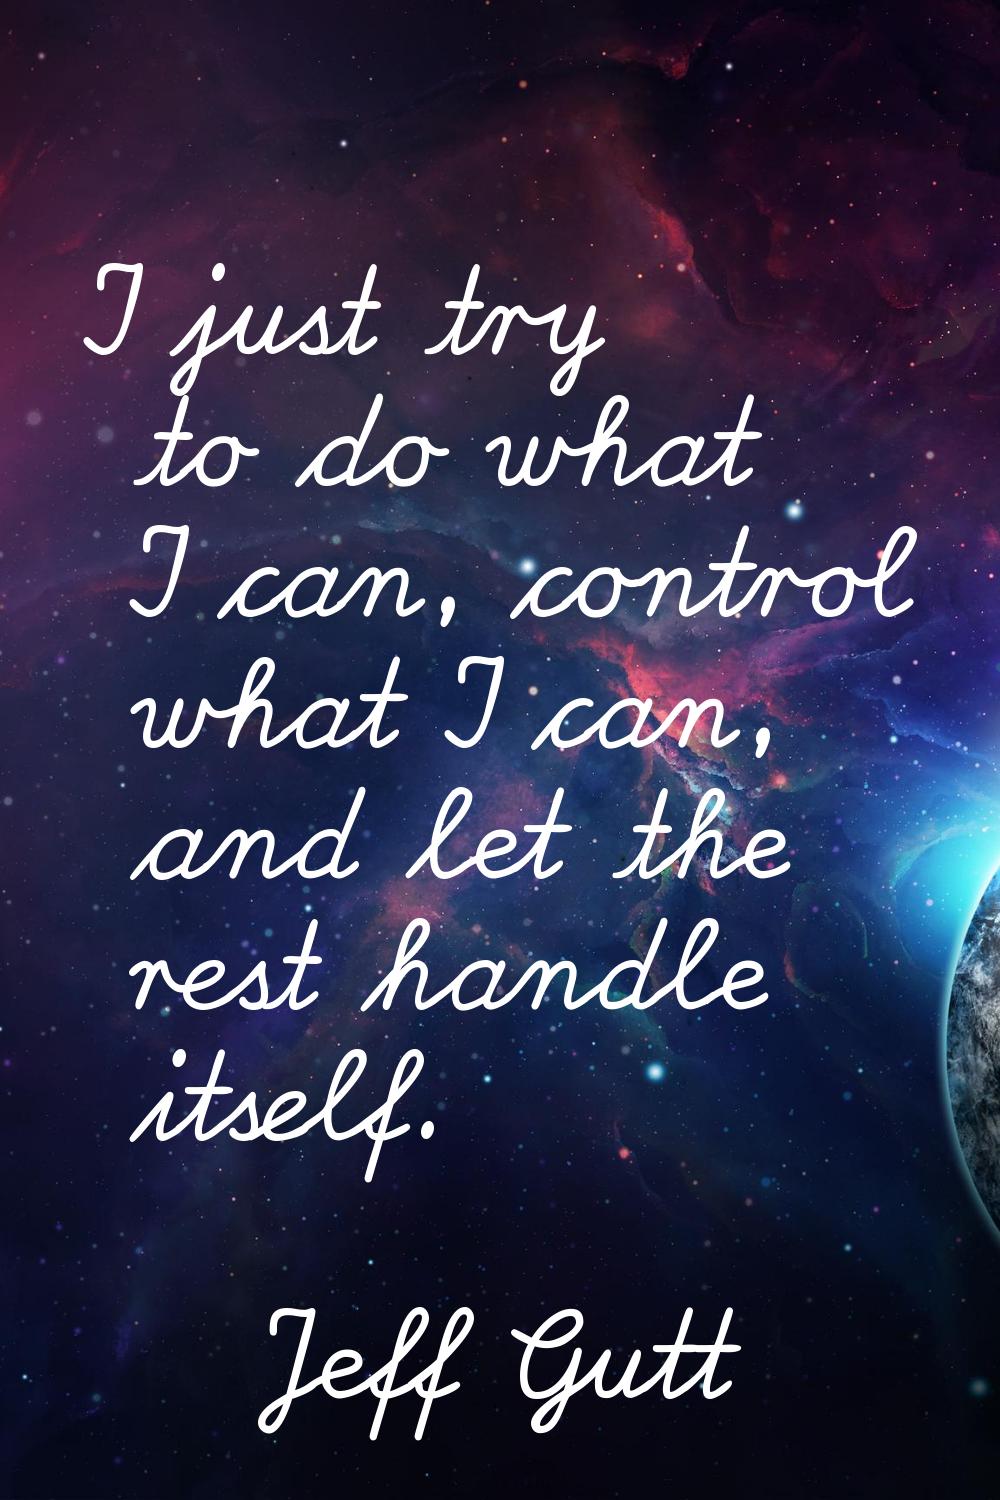 I just try to do what I can, control what I can, and let the rest handle itself.